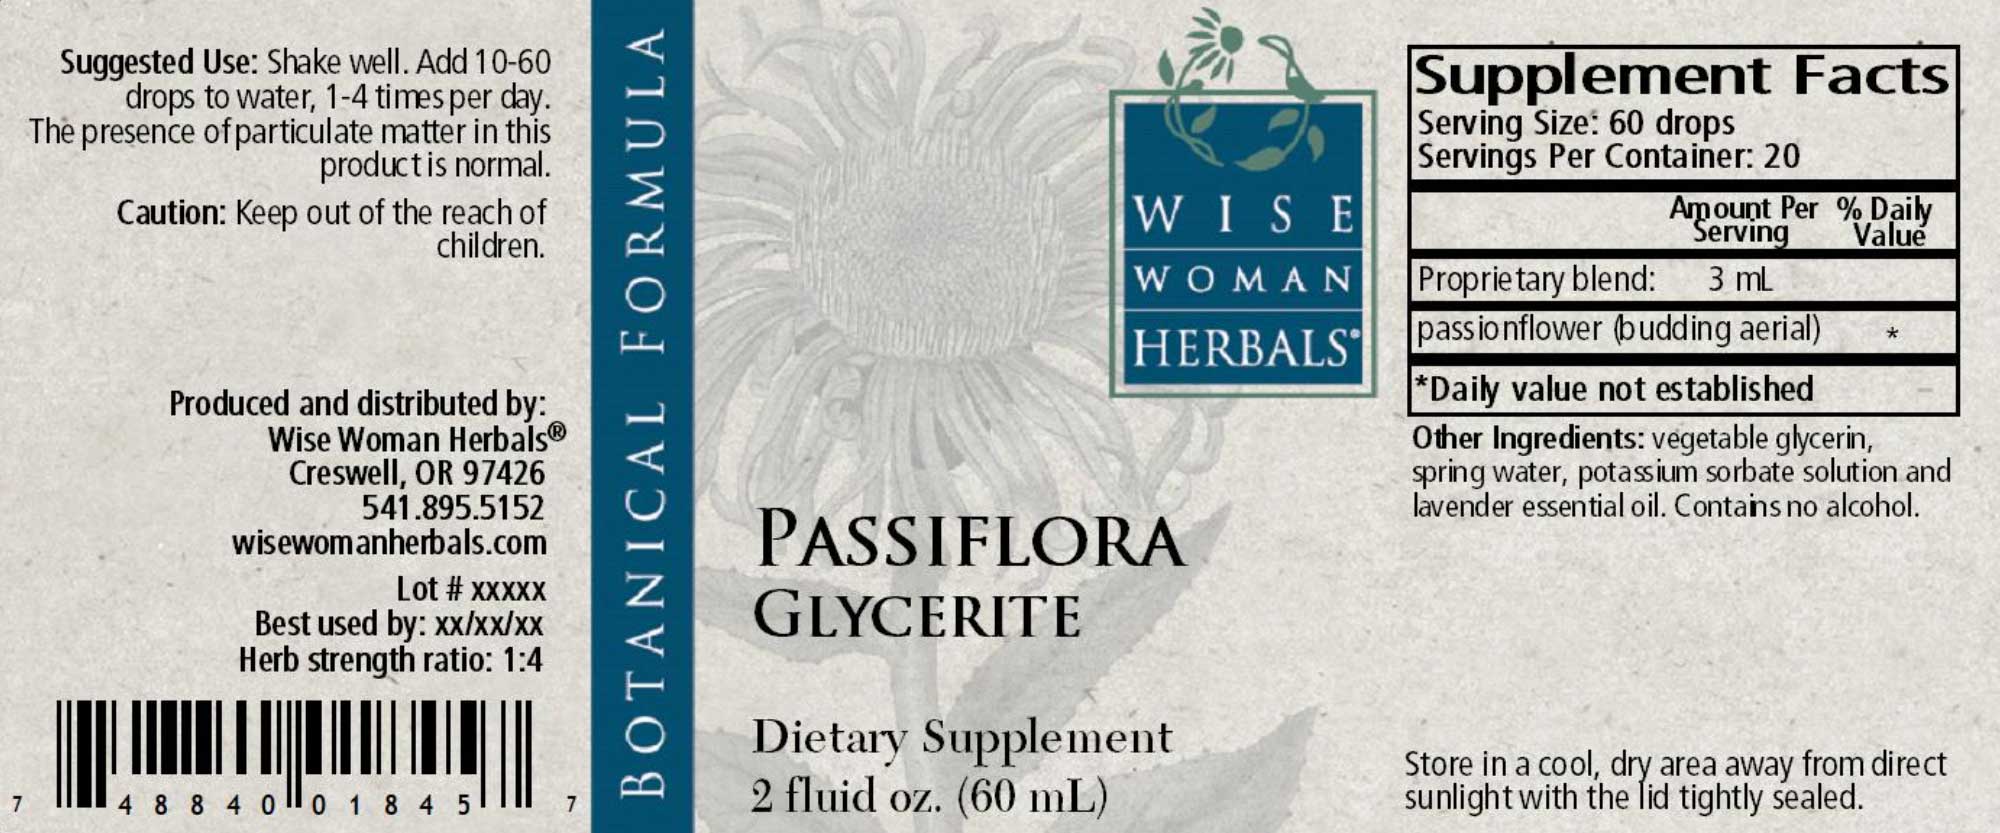 Wise Woman Herbals Passiflora (Passionflower) Glycerite Label